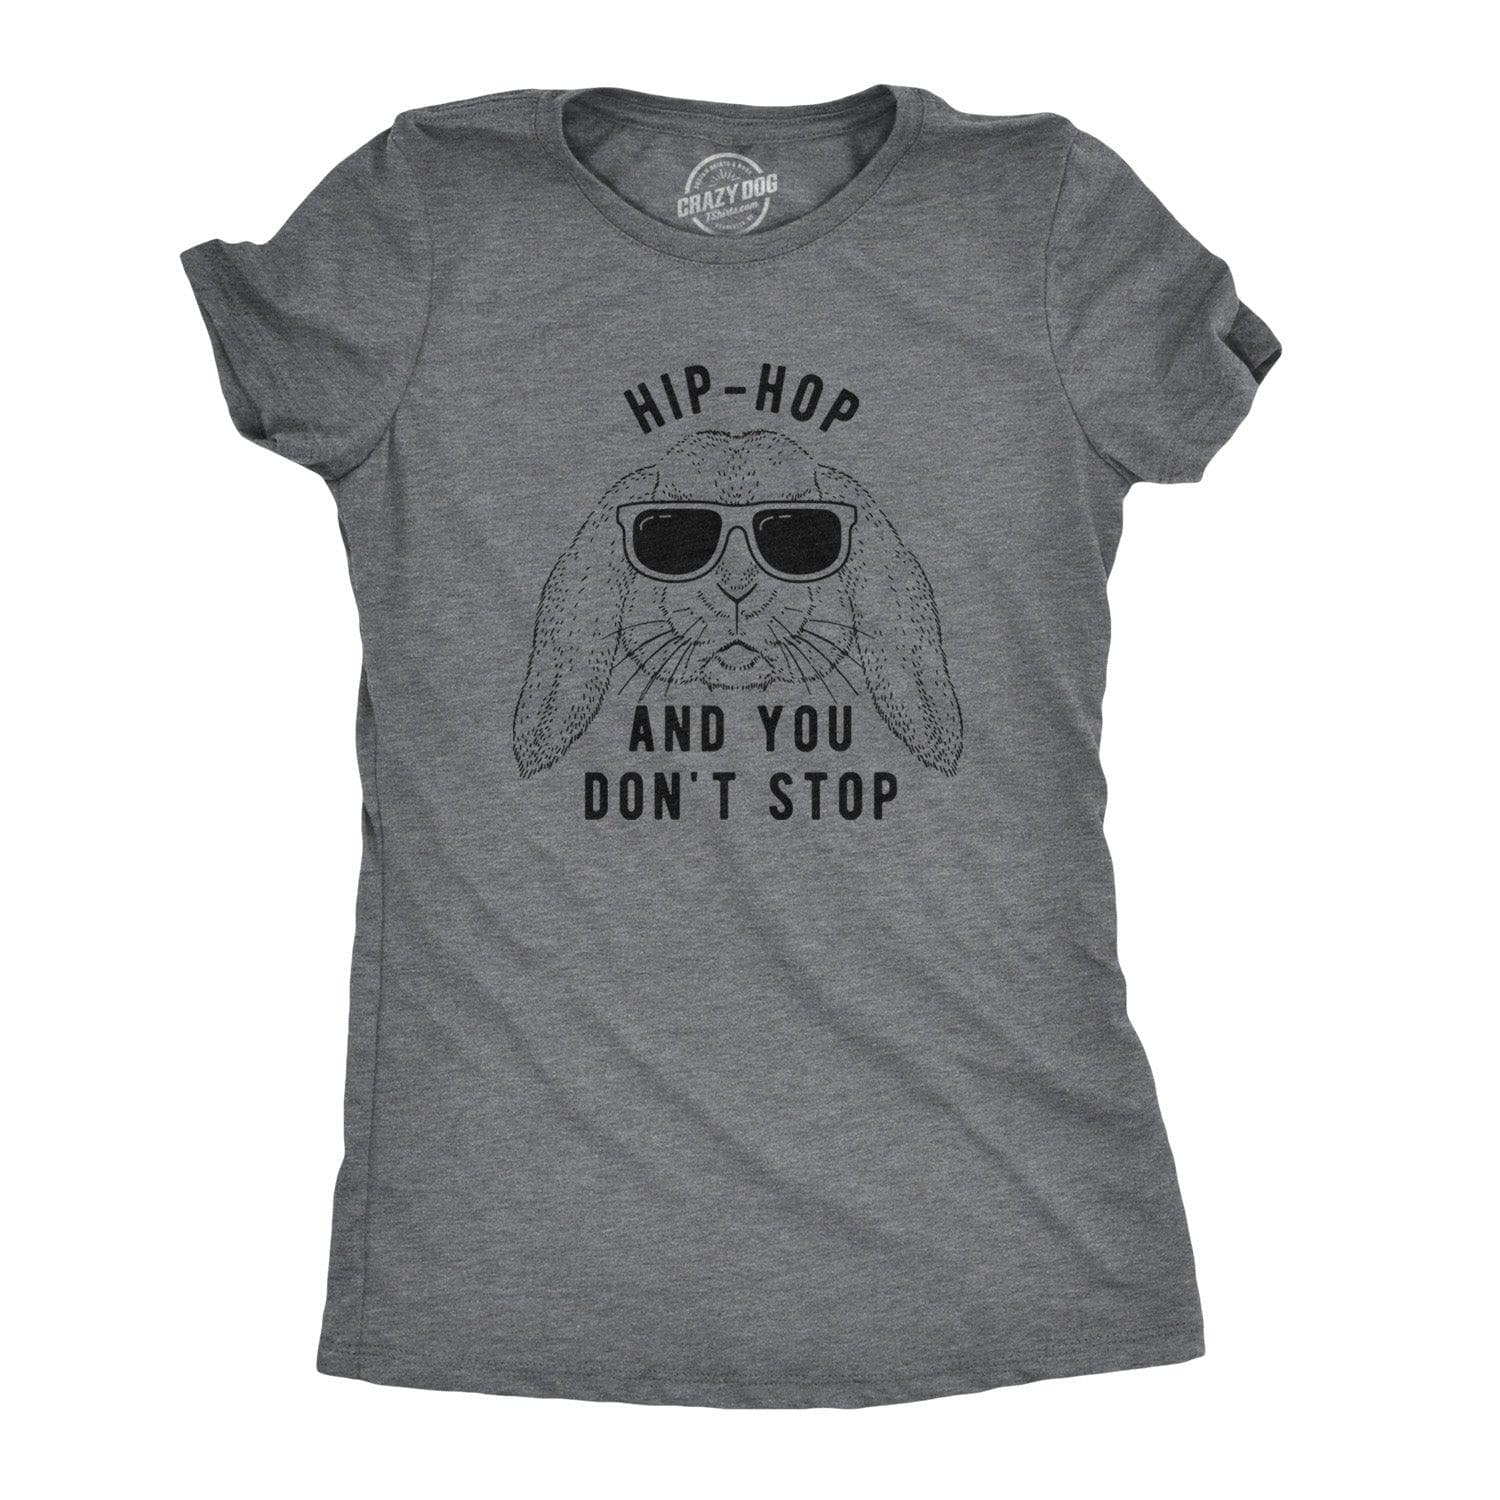 Hip-Hop And You Don't Stop Women's Tshirt  -  Crazy Dog T-Shirts